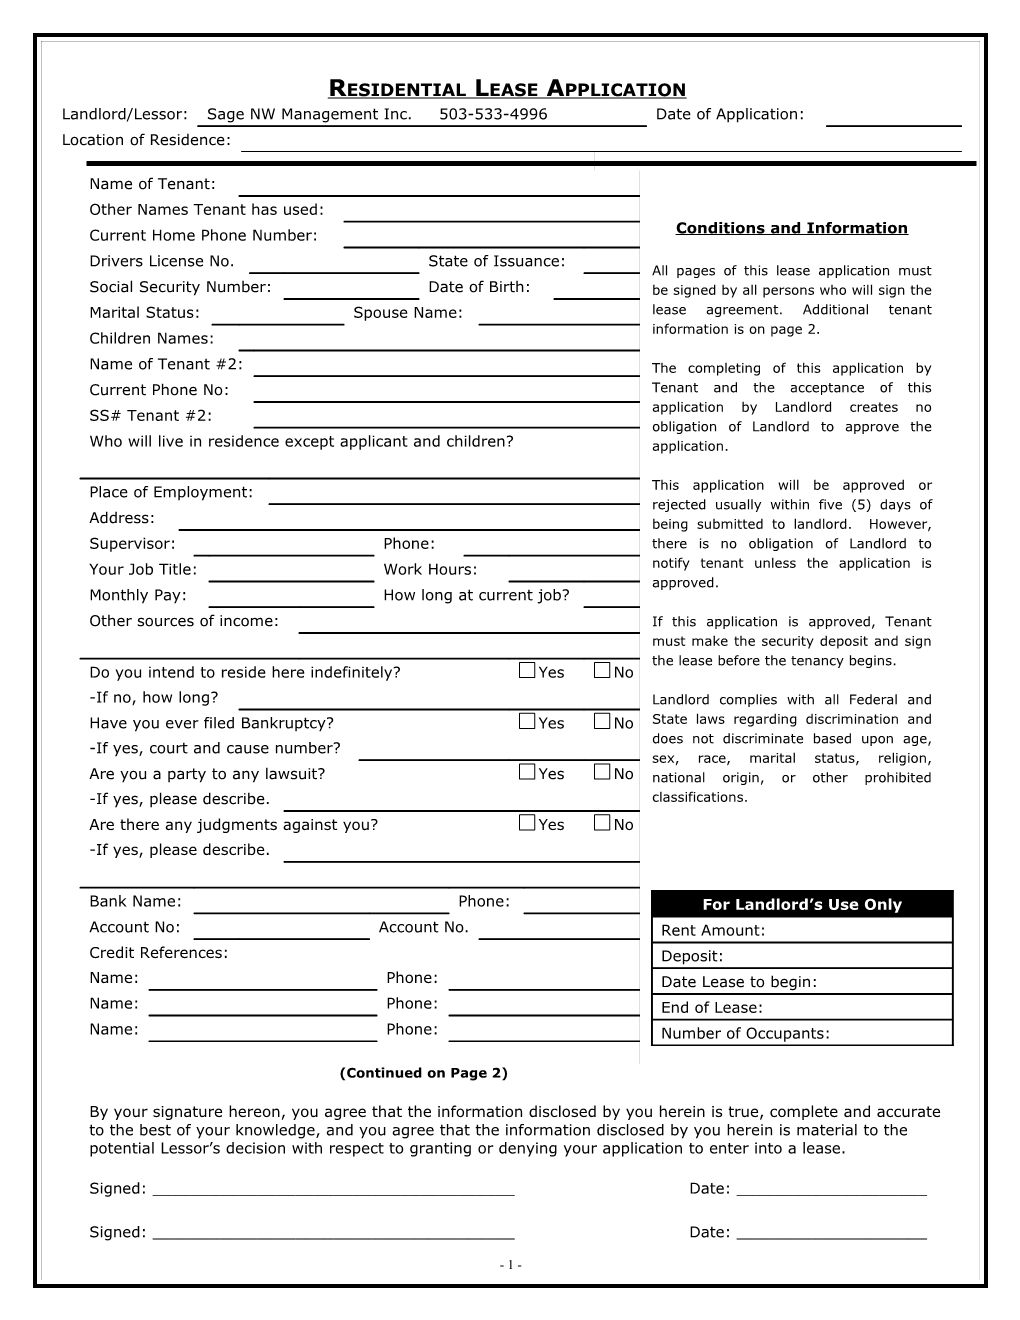 Application for Residential Lease